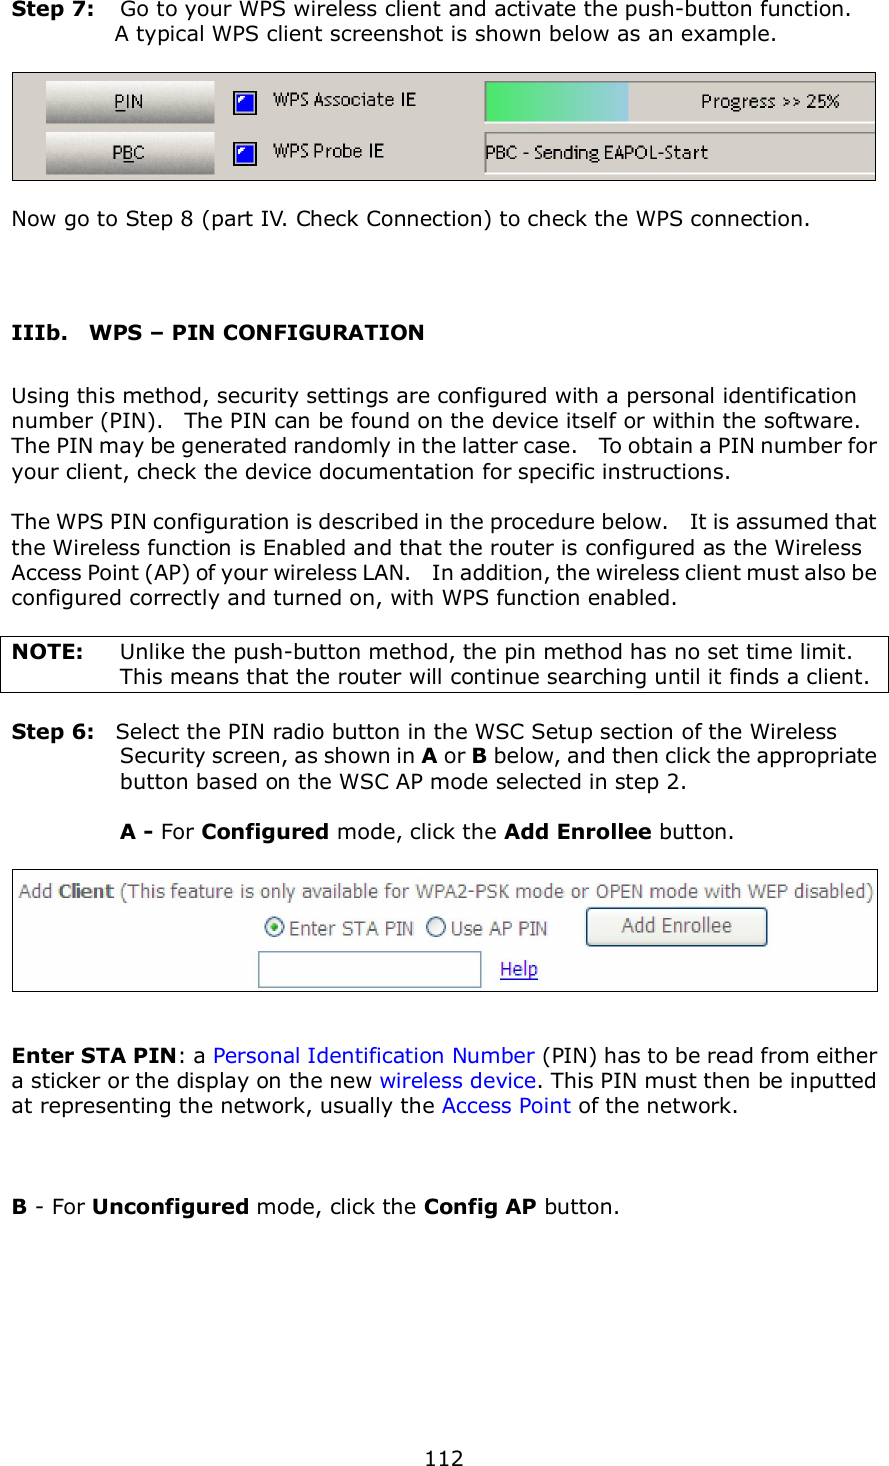  112  Step 7:  Go to your WPS wireless client and activate the push-button function.       A typical WPS client screenshot is shown below as an example.    Now go to Step 8 (part IV. Check Connection) to check the WPS connection.   IIIb.    WPS – PIN CONFIGURATION Using this method, security settings are configured with a personal identification number (PIN).    The PIN can be found on the device itself or within the software.   The PIN may be generated randomly in the latter case.    To obtain a PIN number for your client, check the device documentation for specific instructions.  The WPS PIN configuration is described in the procedure below.    It is assumed that the Wireless function is Enabled and that the router is configured as the Wireless Access Point (AP) of your wireless LAN.    In addition, the wireless client must also be configured correctly and turned on, with WPS function enabled.  NOTE:  Unlike the push-button method, the pin method has no set time limit.   This means that the router will continue searching until it finds a client.  Step 6:    Select the PIN radio button in the WSC Setup section of the Wireless Security screen, as shown in A or B below, and then click the appropriate button based on the WSC AP mode selected in step 2.    A - For Configured mode, click the Add Enrollee button.     Enter STA PIN: a Personal Identification Number (PIN) has to be read from either a sticker or the display on the new wireless device. This PIN must then be inputted at representing the network, usually the Access Point of the network.    B - For Unconfigured mode, click the Config AP button.  